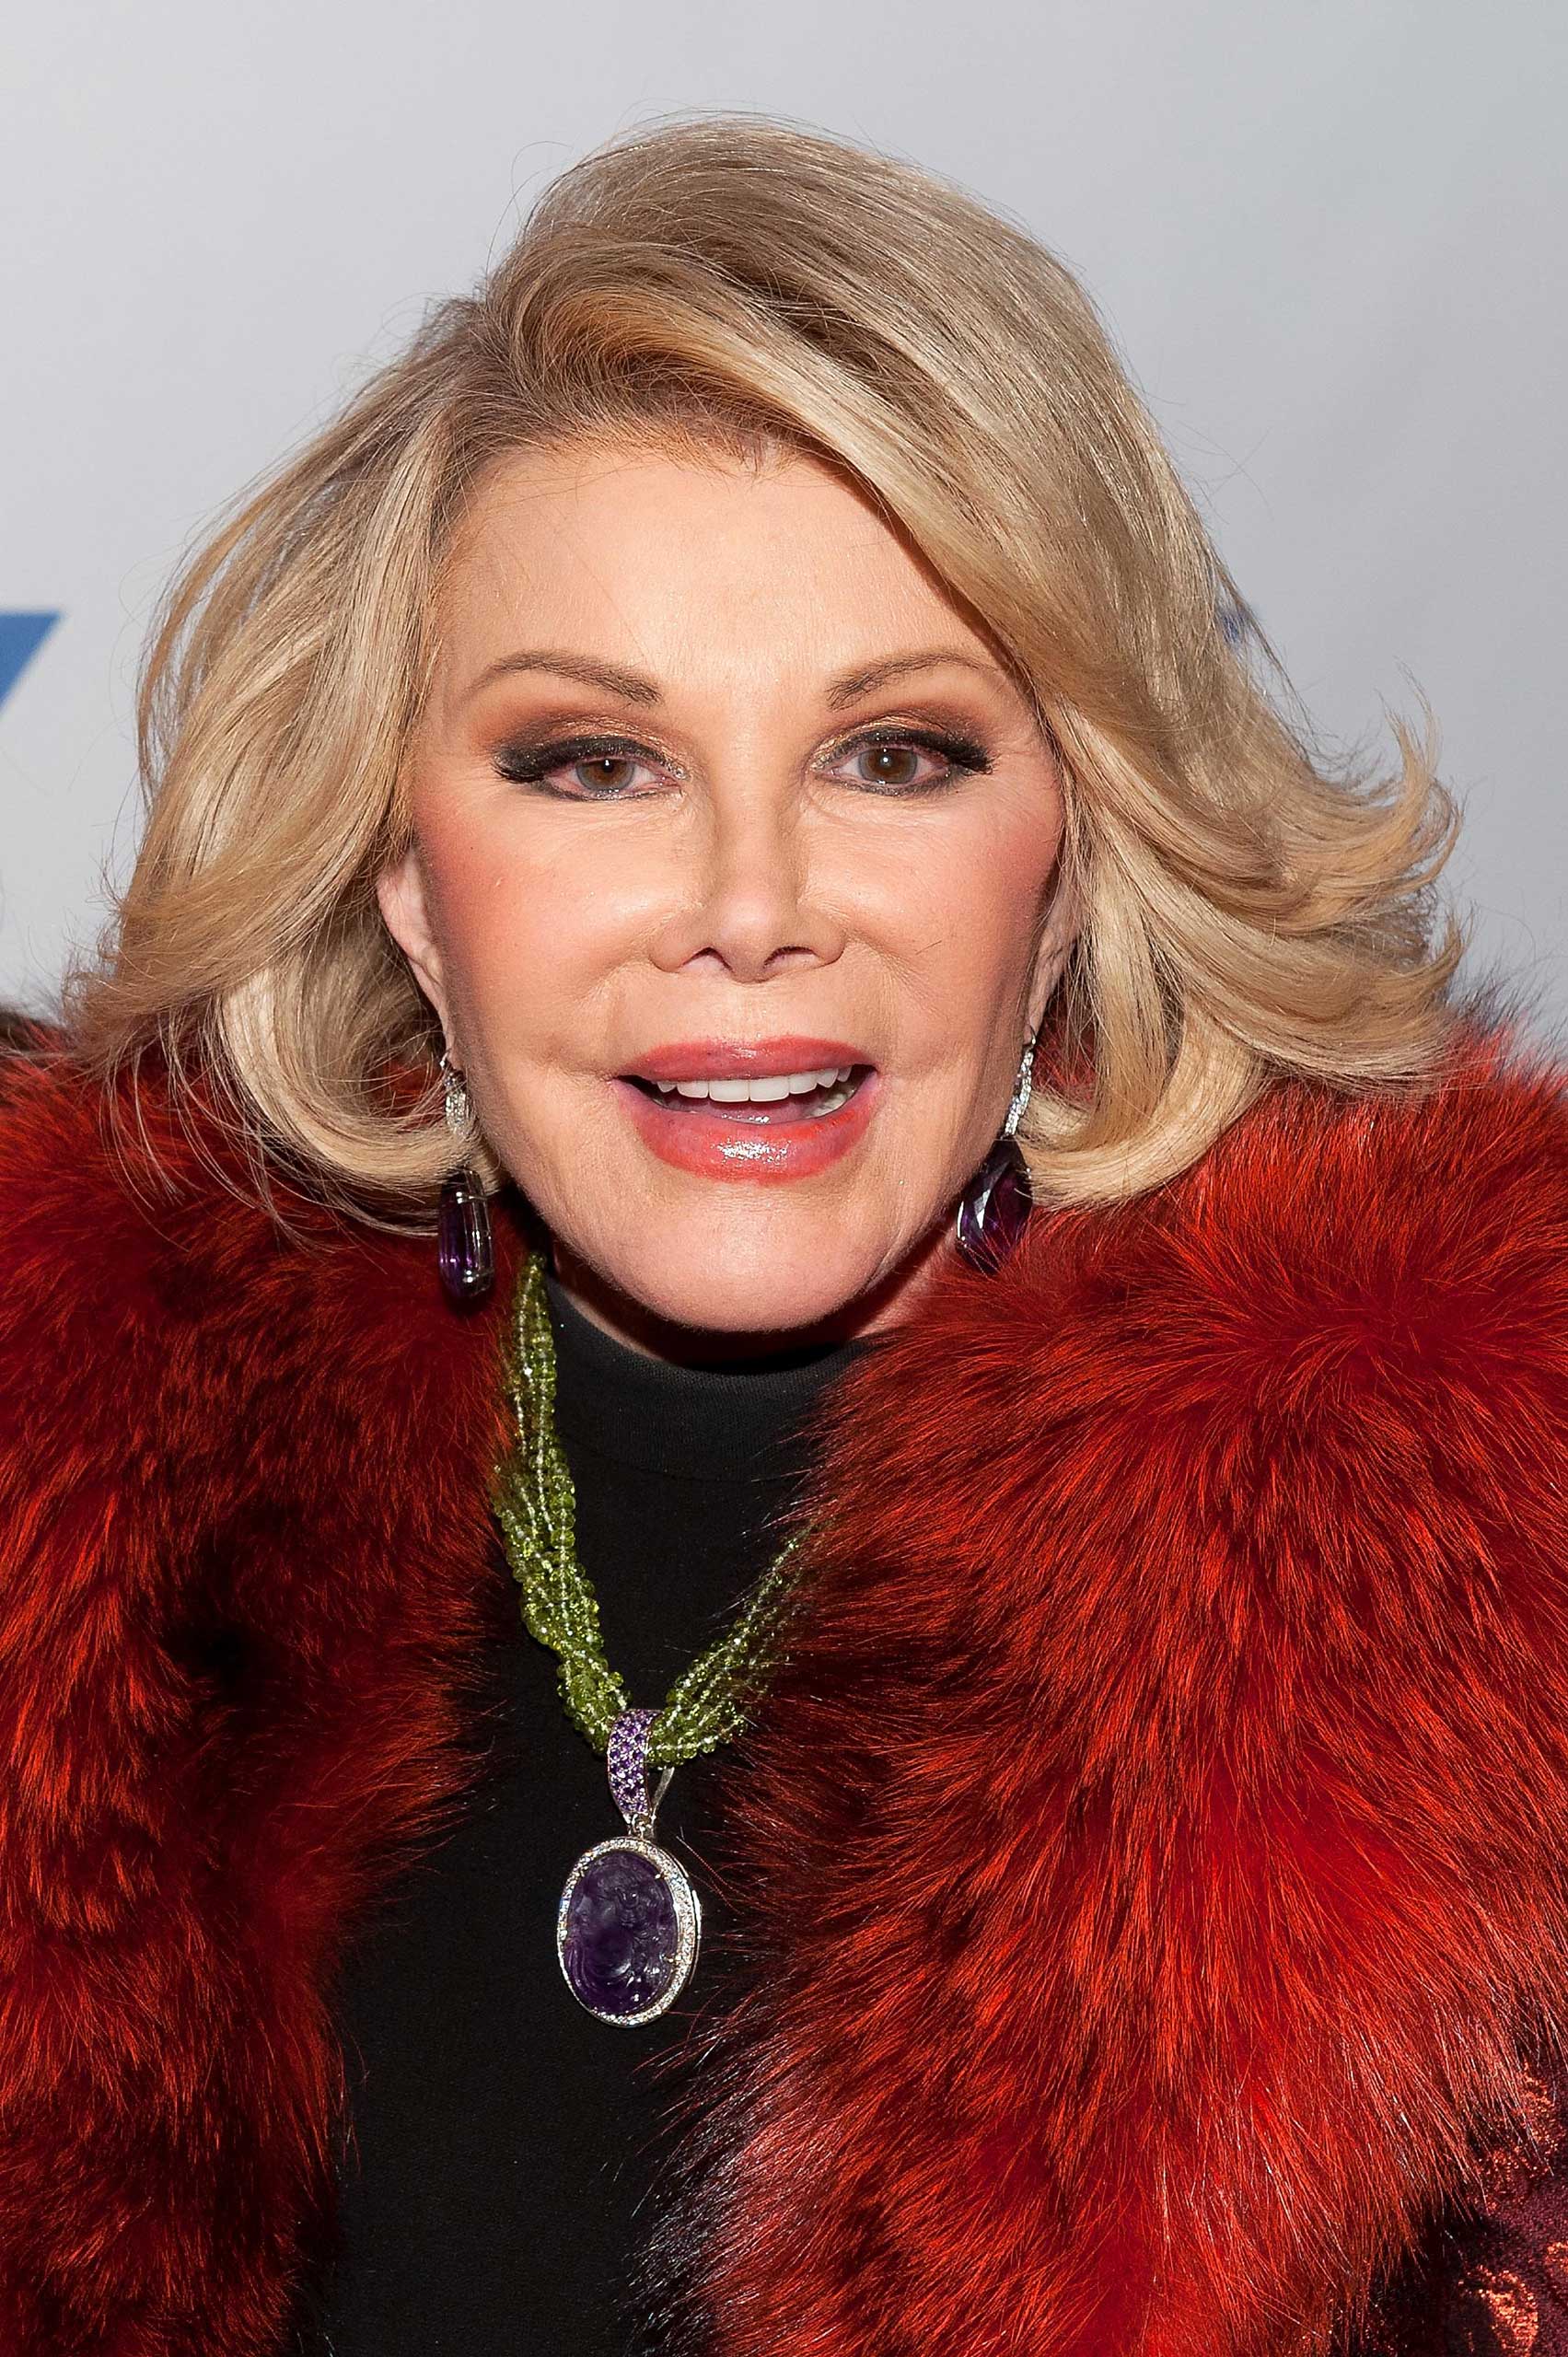 92nd Street Y Presents: An Evening With Joan And Melissa Rivers